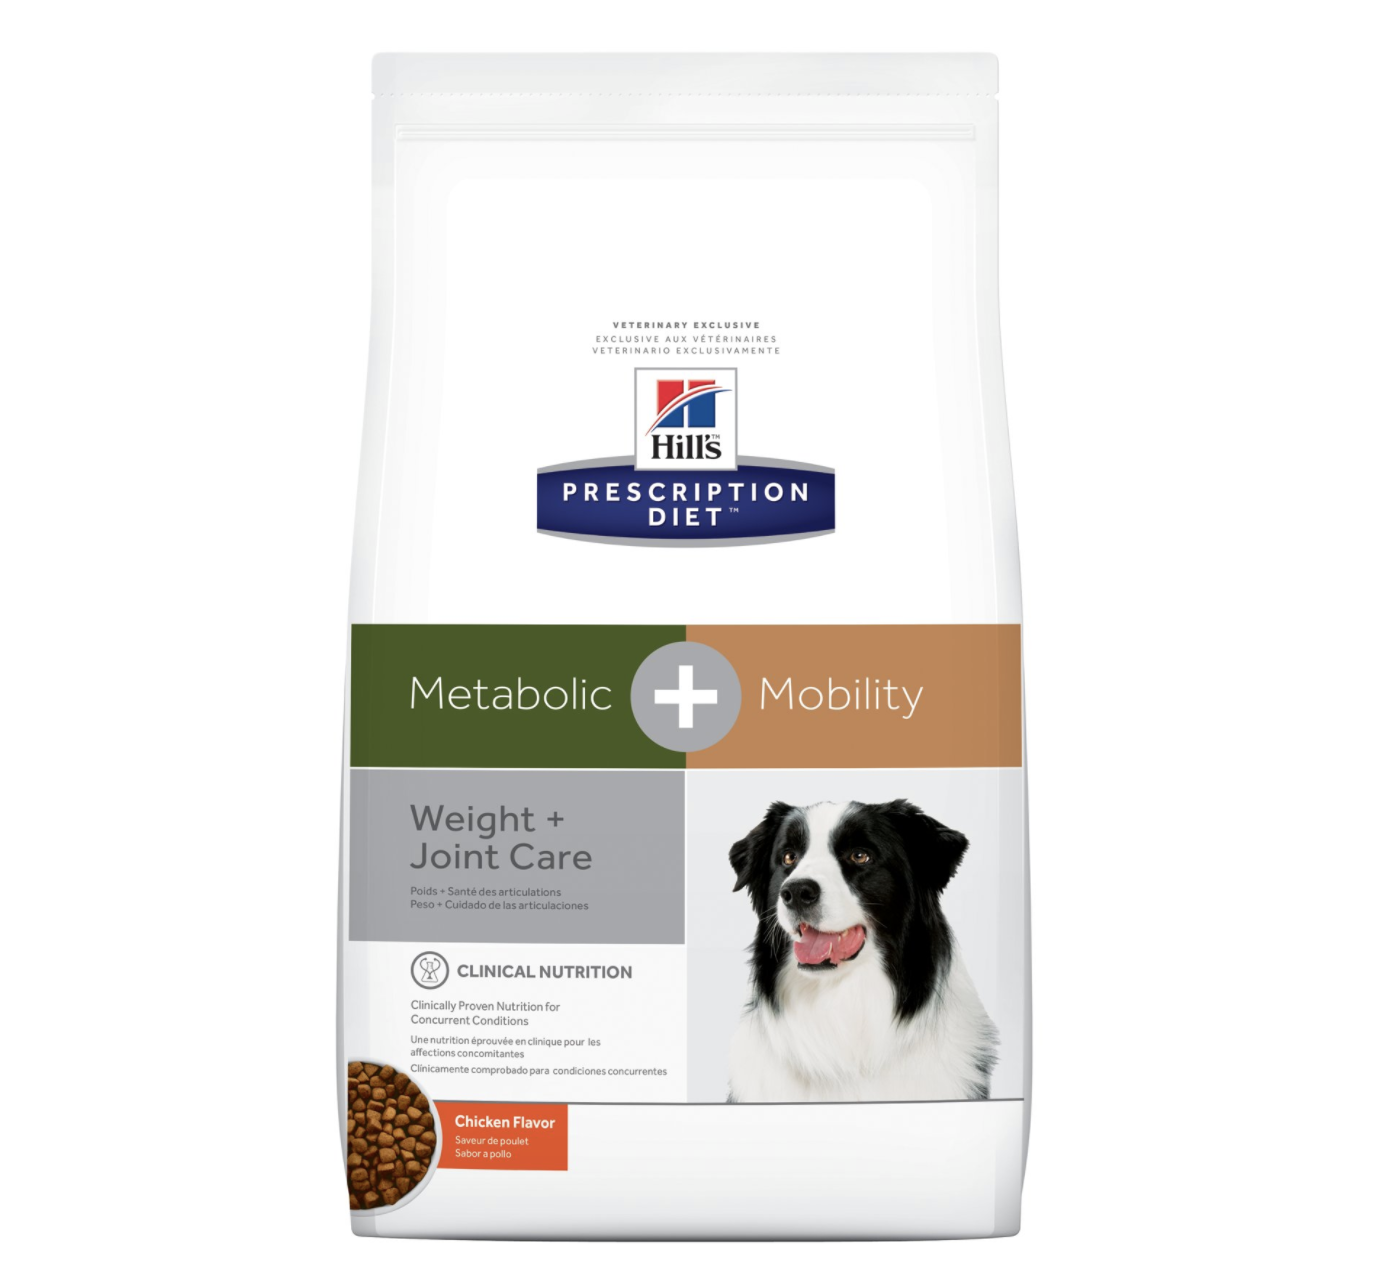 Hill&#x27;s Prescription Diet Metabolic + Mobility, Weight + Joint Care dry dog food in chicken flavor
